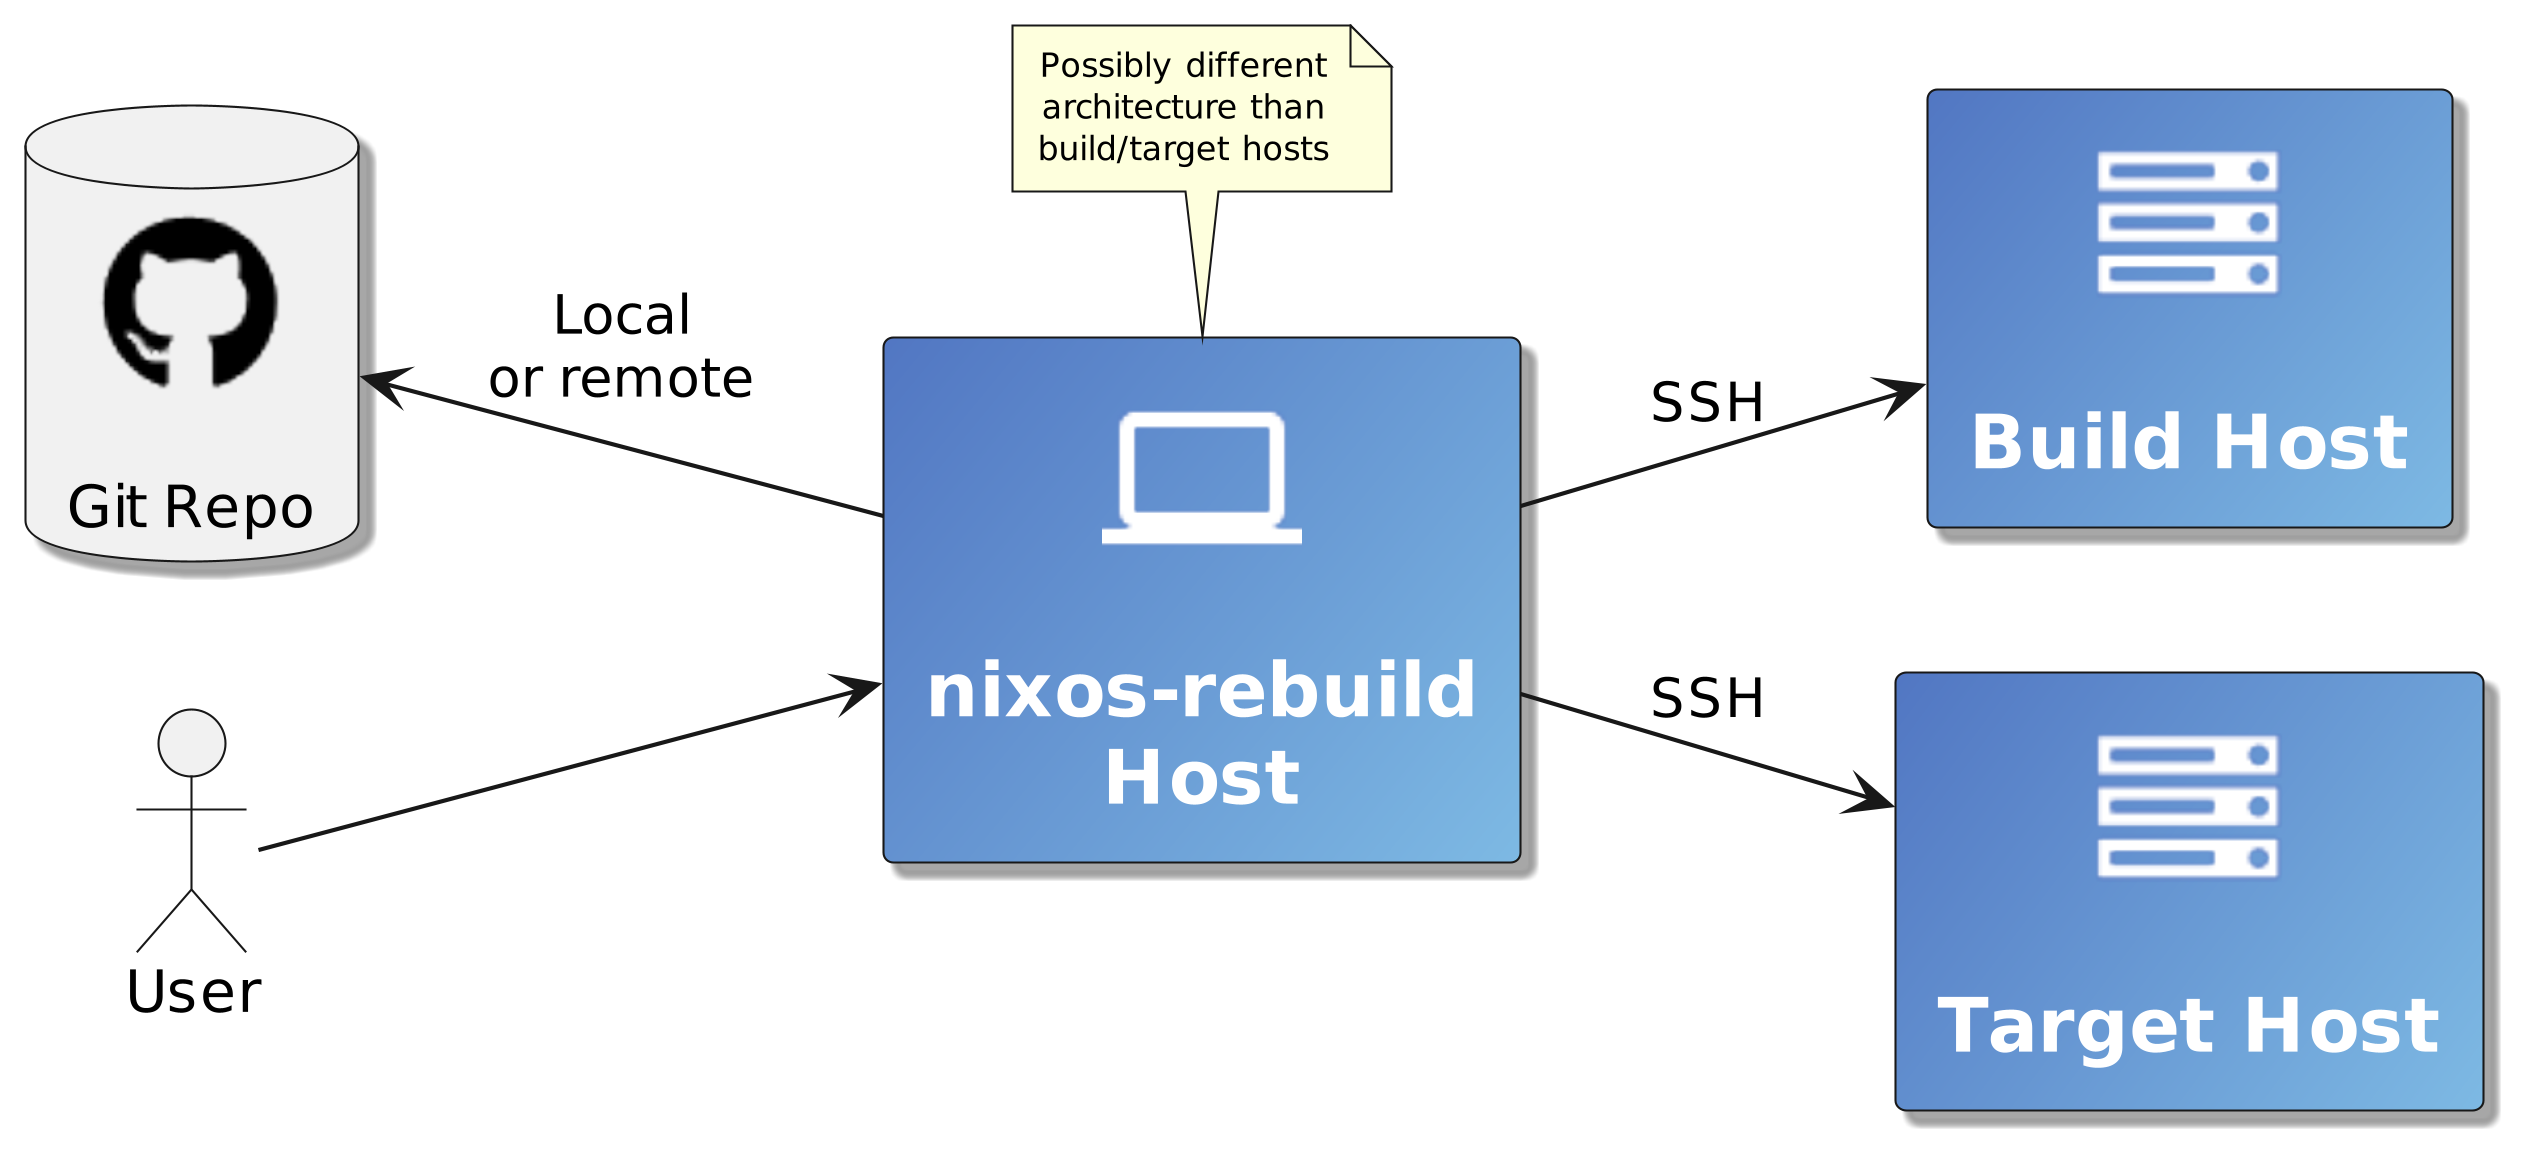 nixos-rebuild can build and deploy on/to other machines